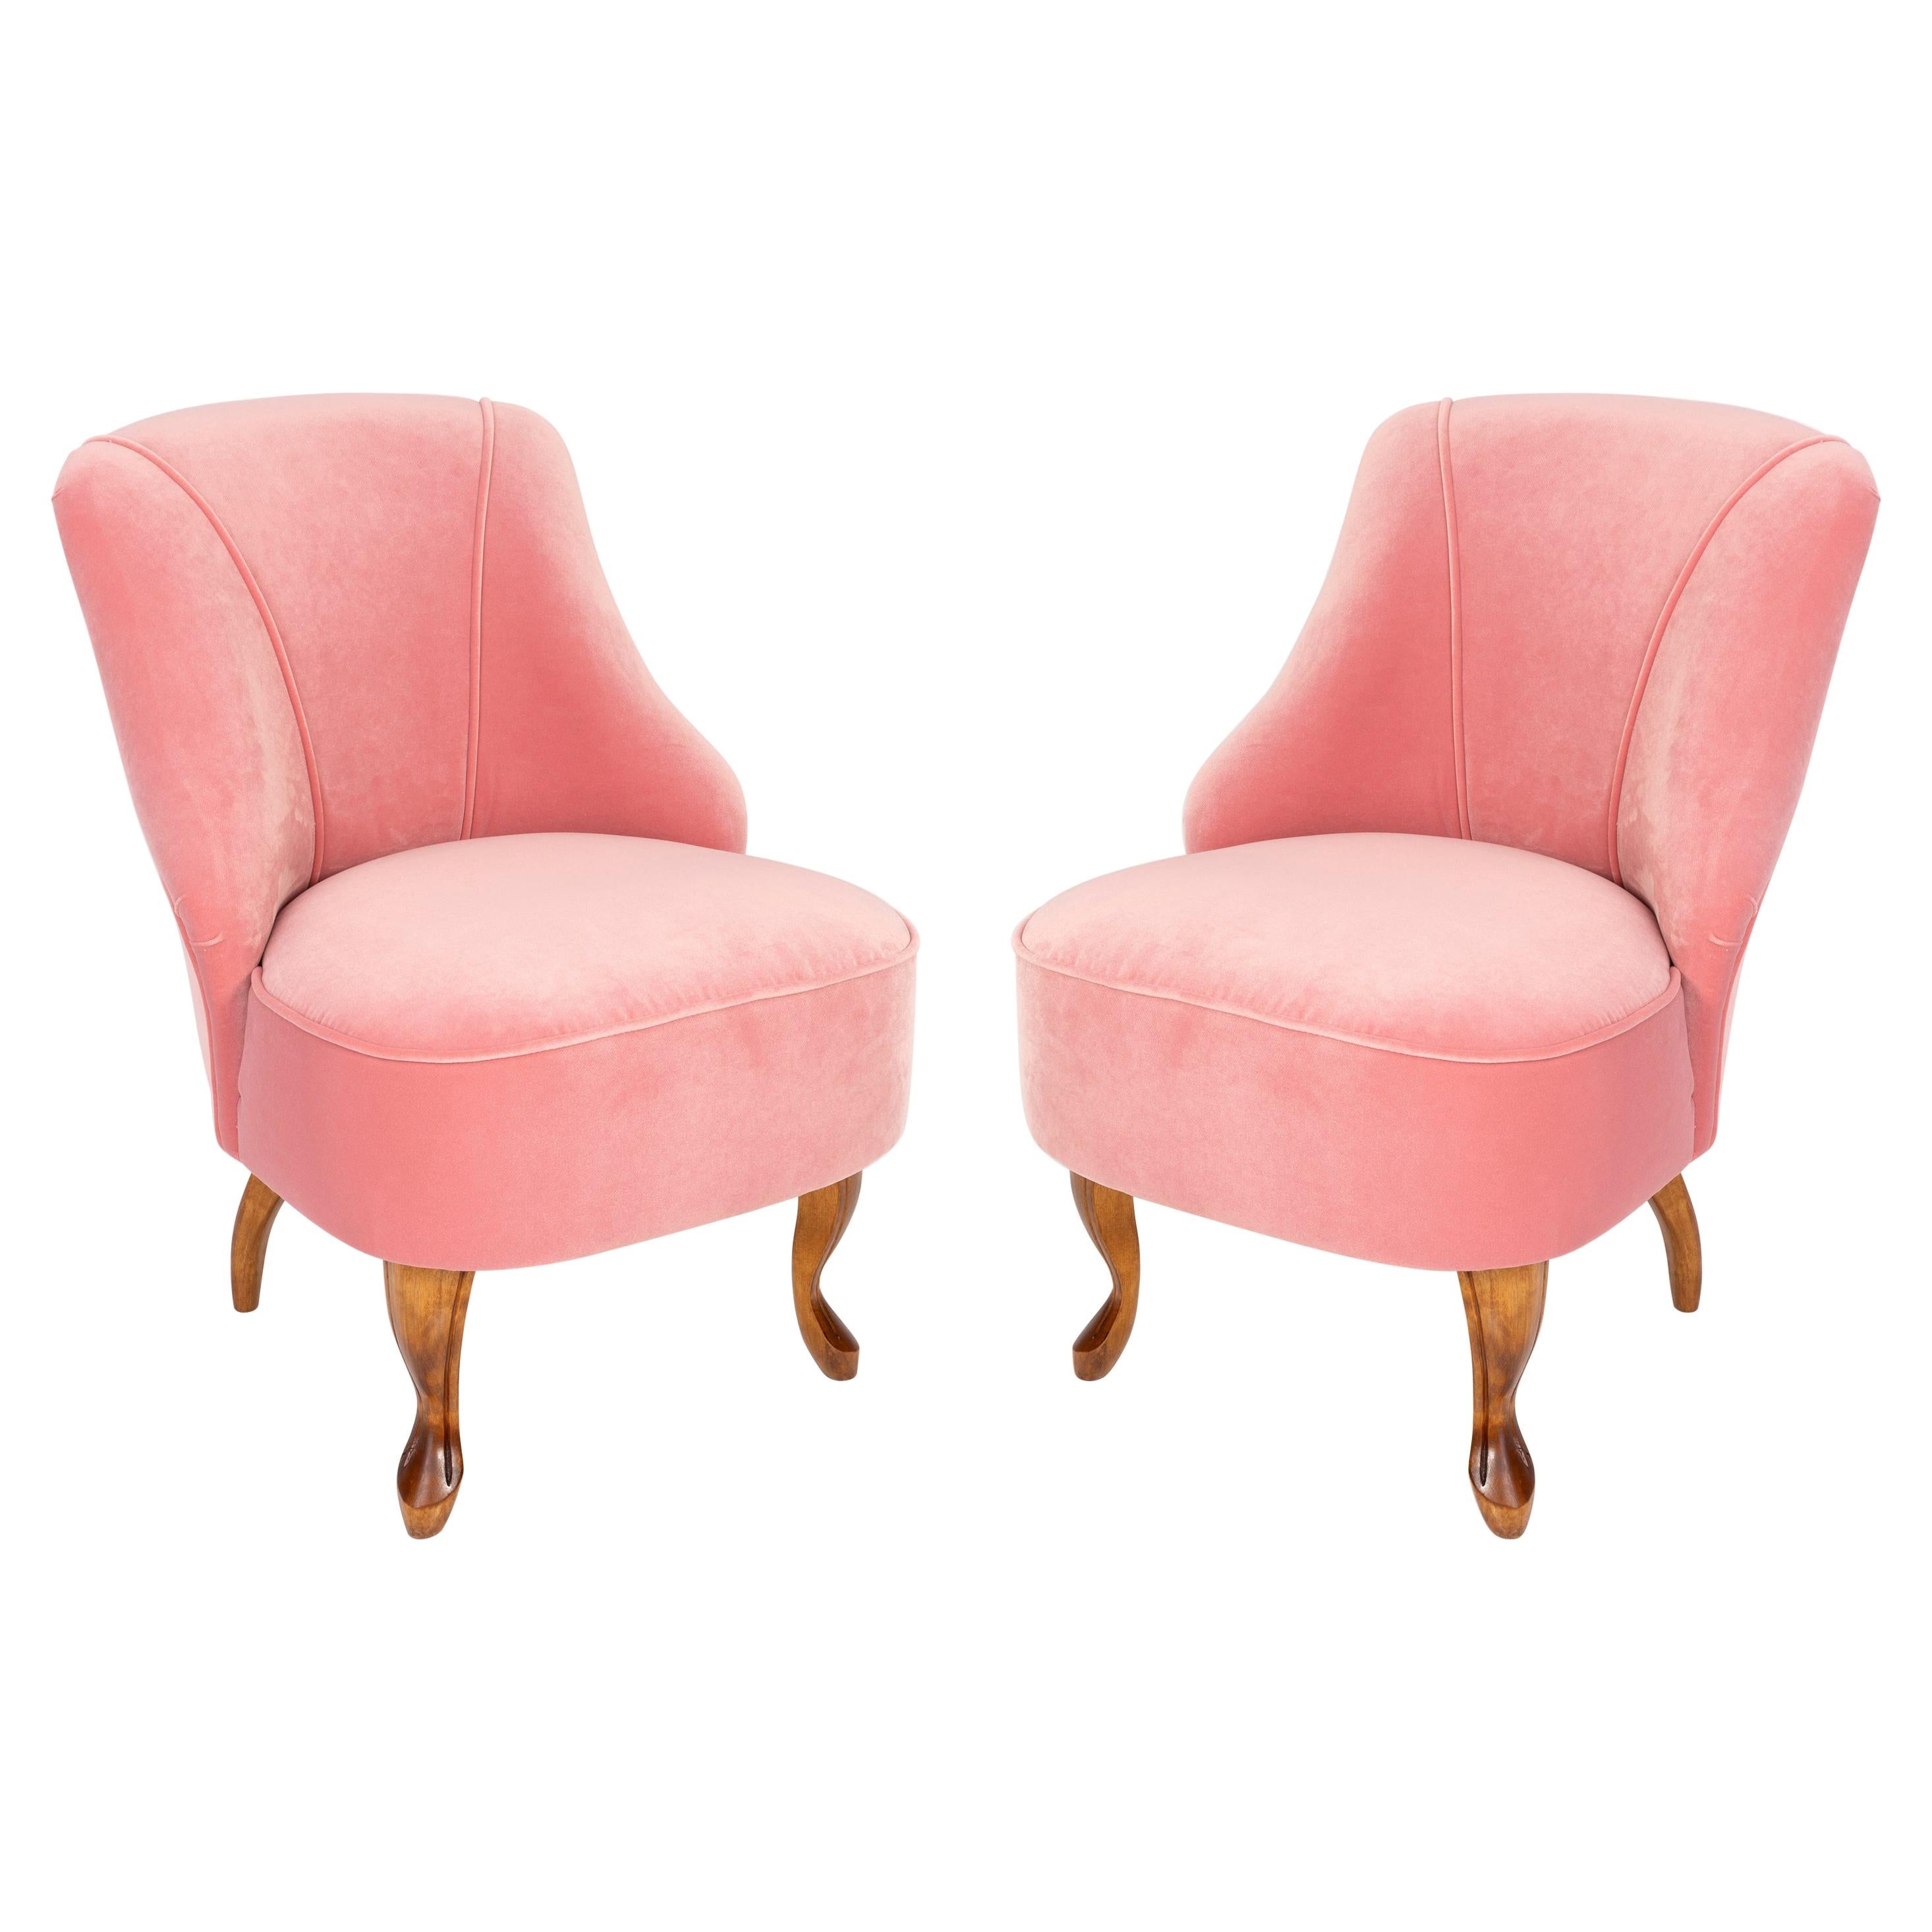 Set of Two 20th Century Art Deco Baby Pink Armchairs, 1950s